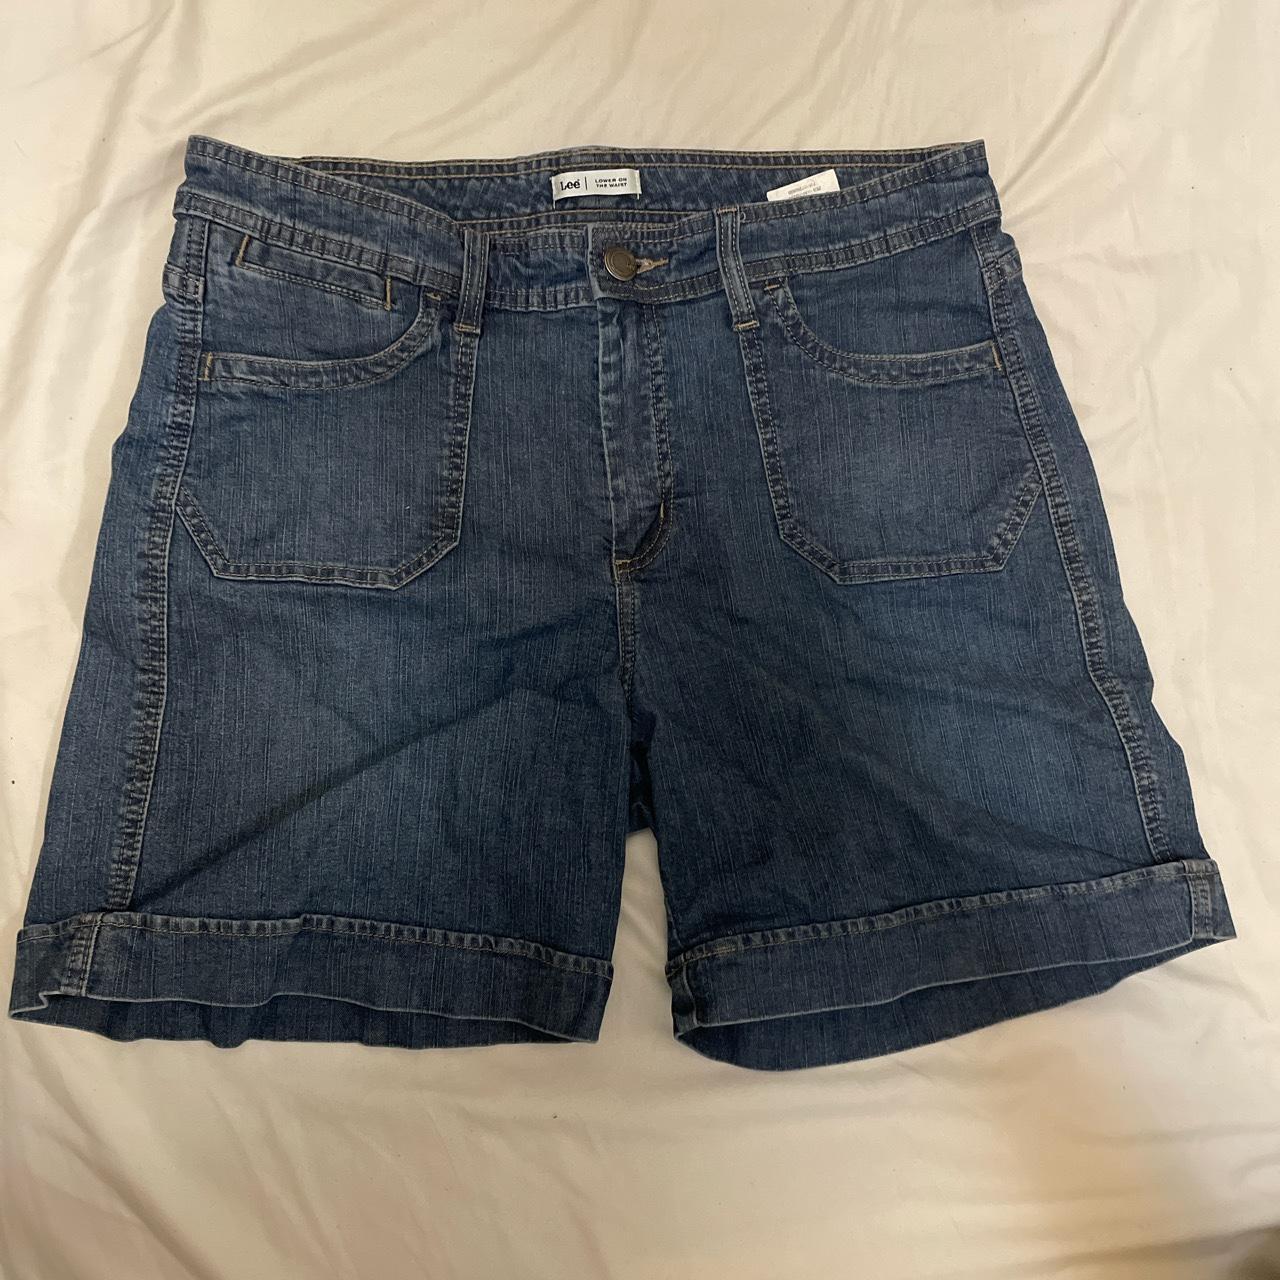 LEE brand jorts super cute and perfect for the last... - Depop